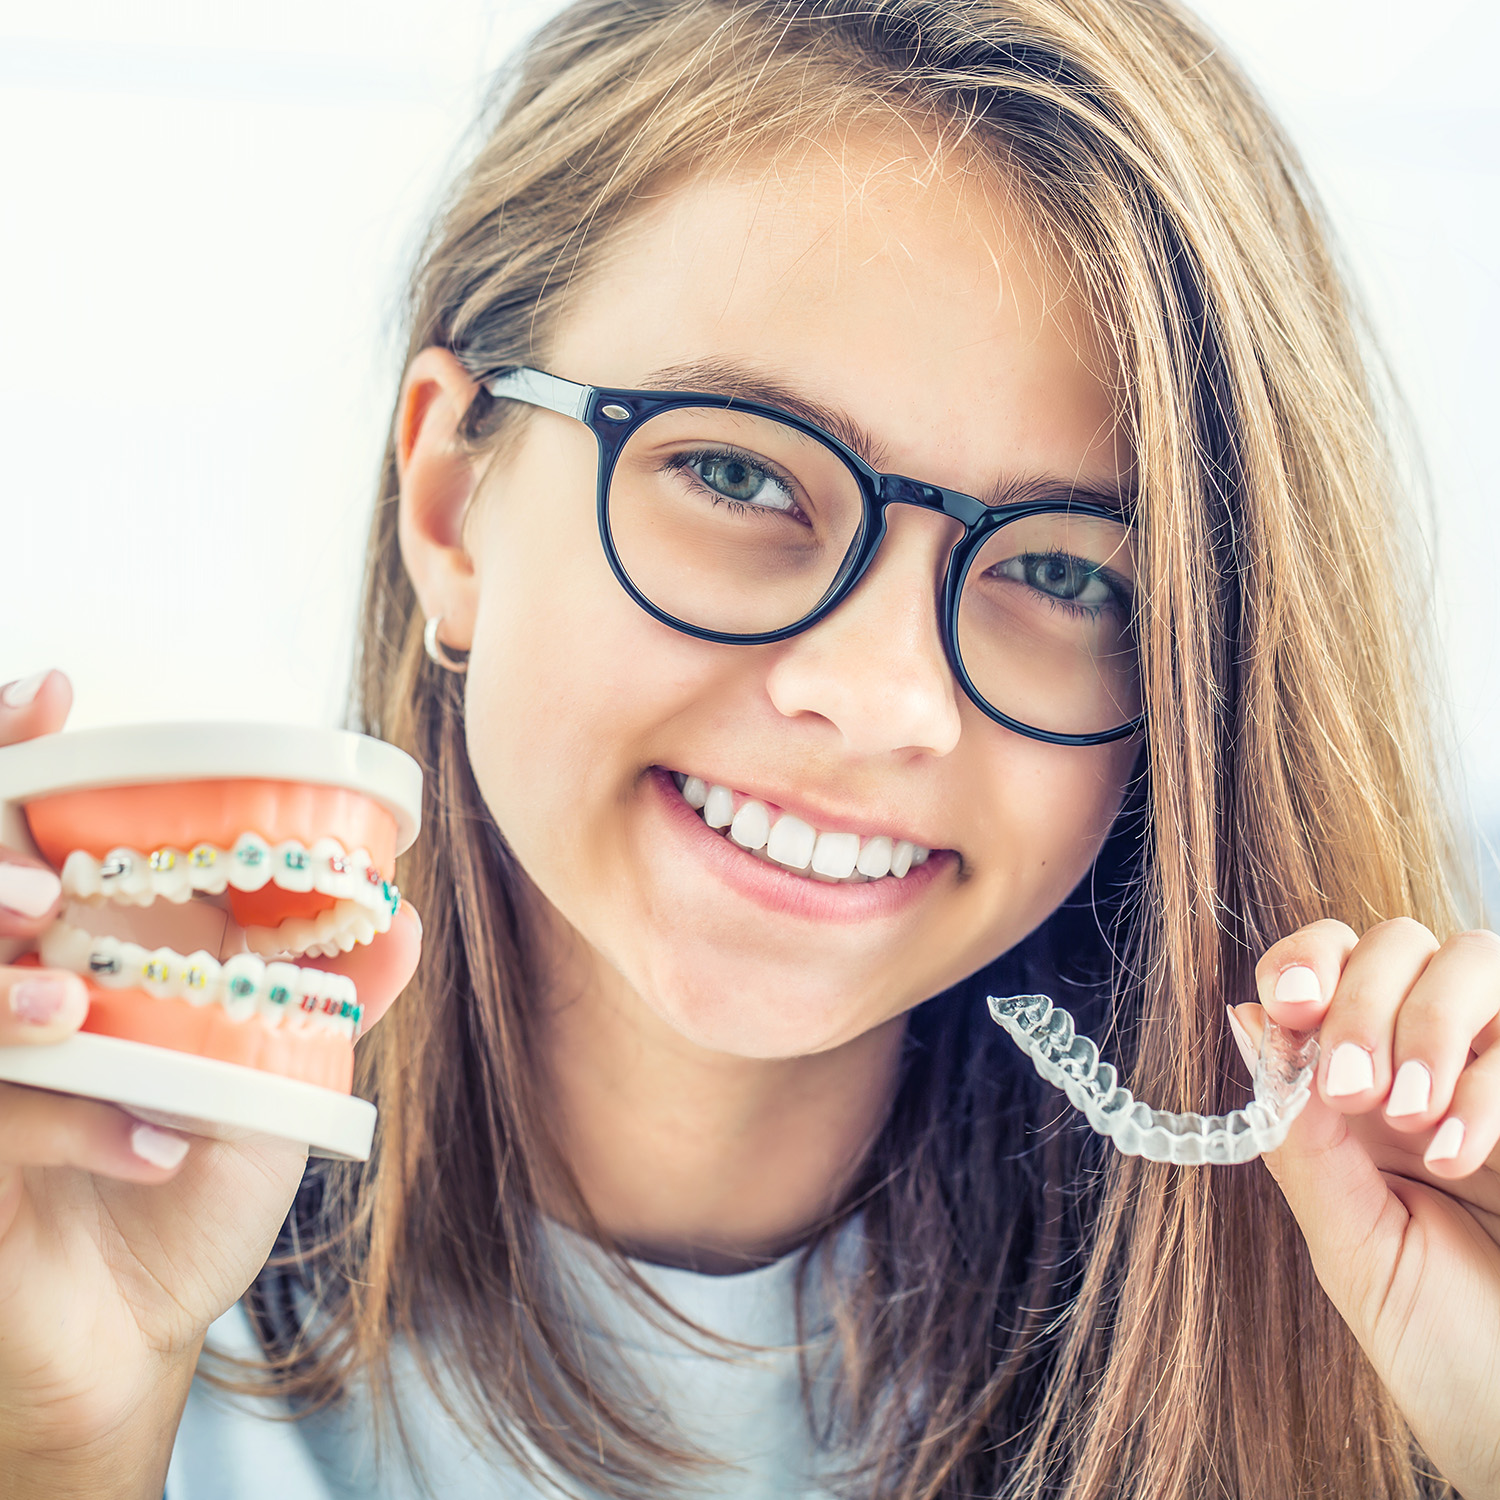 Difference between traditional braces and invisalign